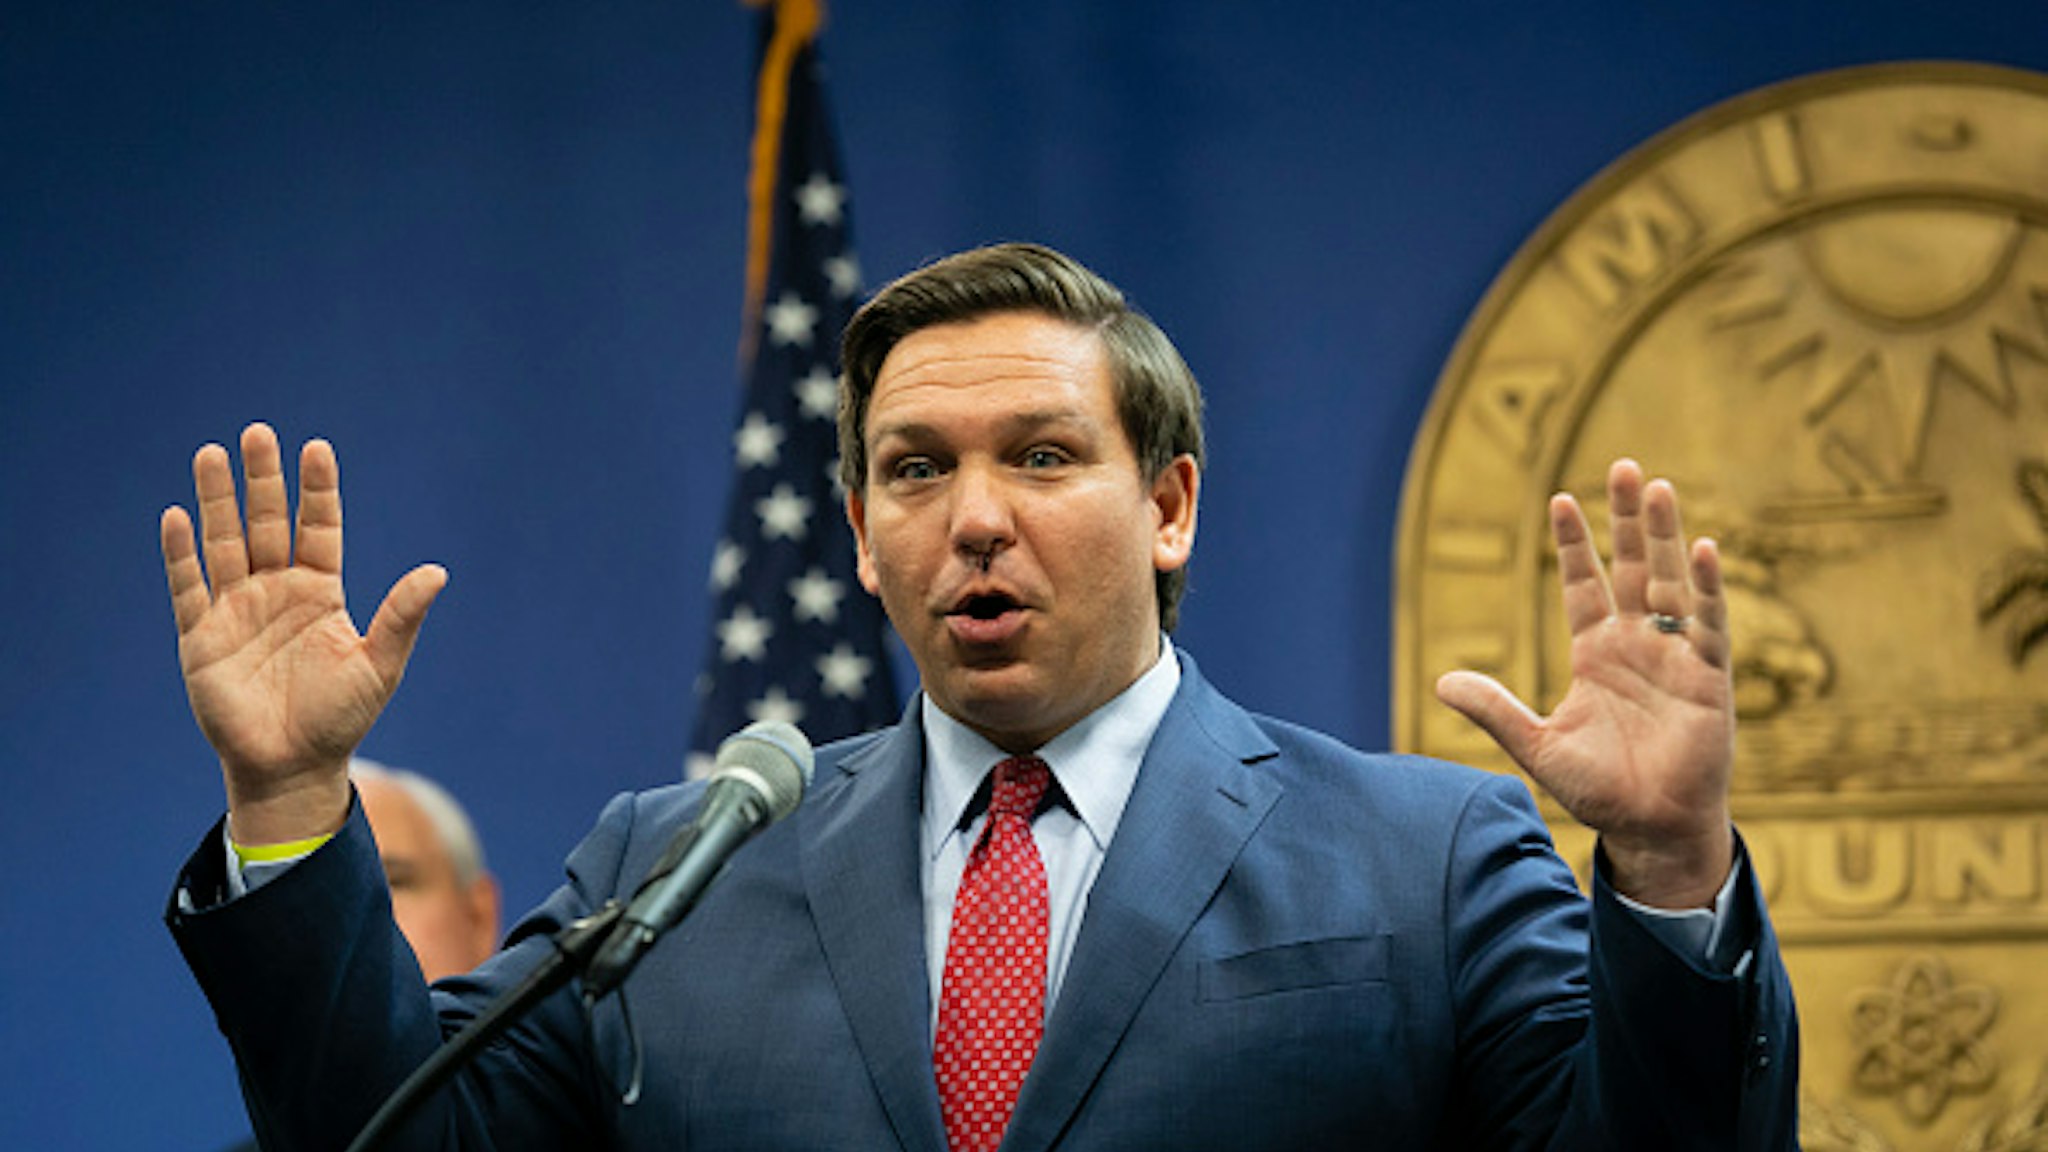 MIAMI, FL - JUNE 08: Florida Governor Ron DeSantis gesticulates during a press conference relating hurricane season updates at the Miami-Dade Emergency Operations Center on June 8, 2020 in Miami, Florida. NOAA has predicted that this year's Atlantic hurricane season will be more active than usual with up to 19 named storms and 6 major hurricanes possible.